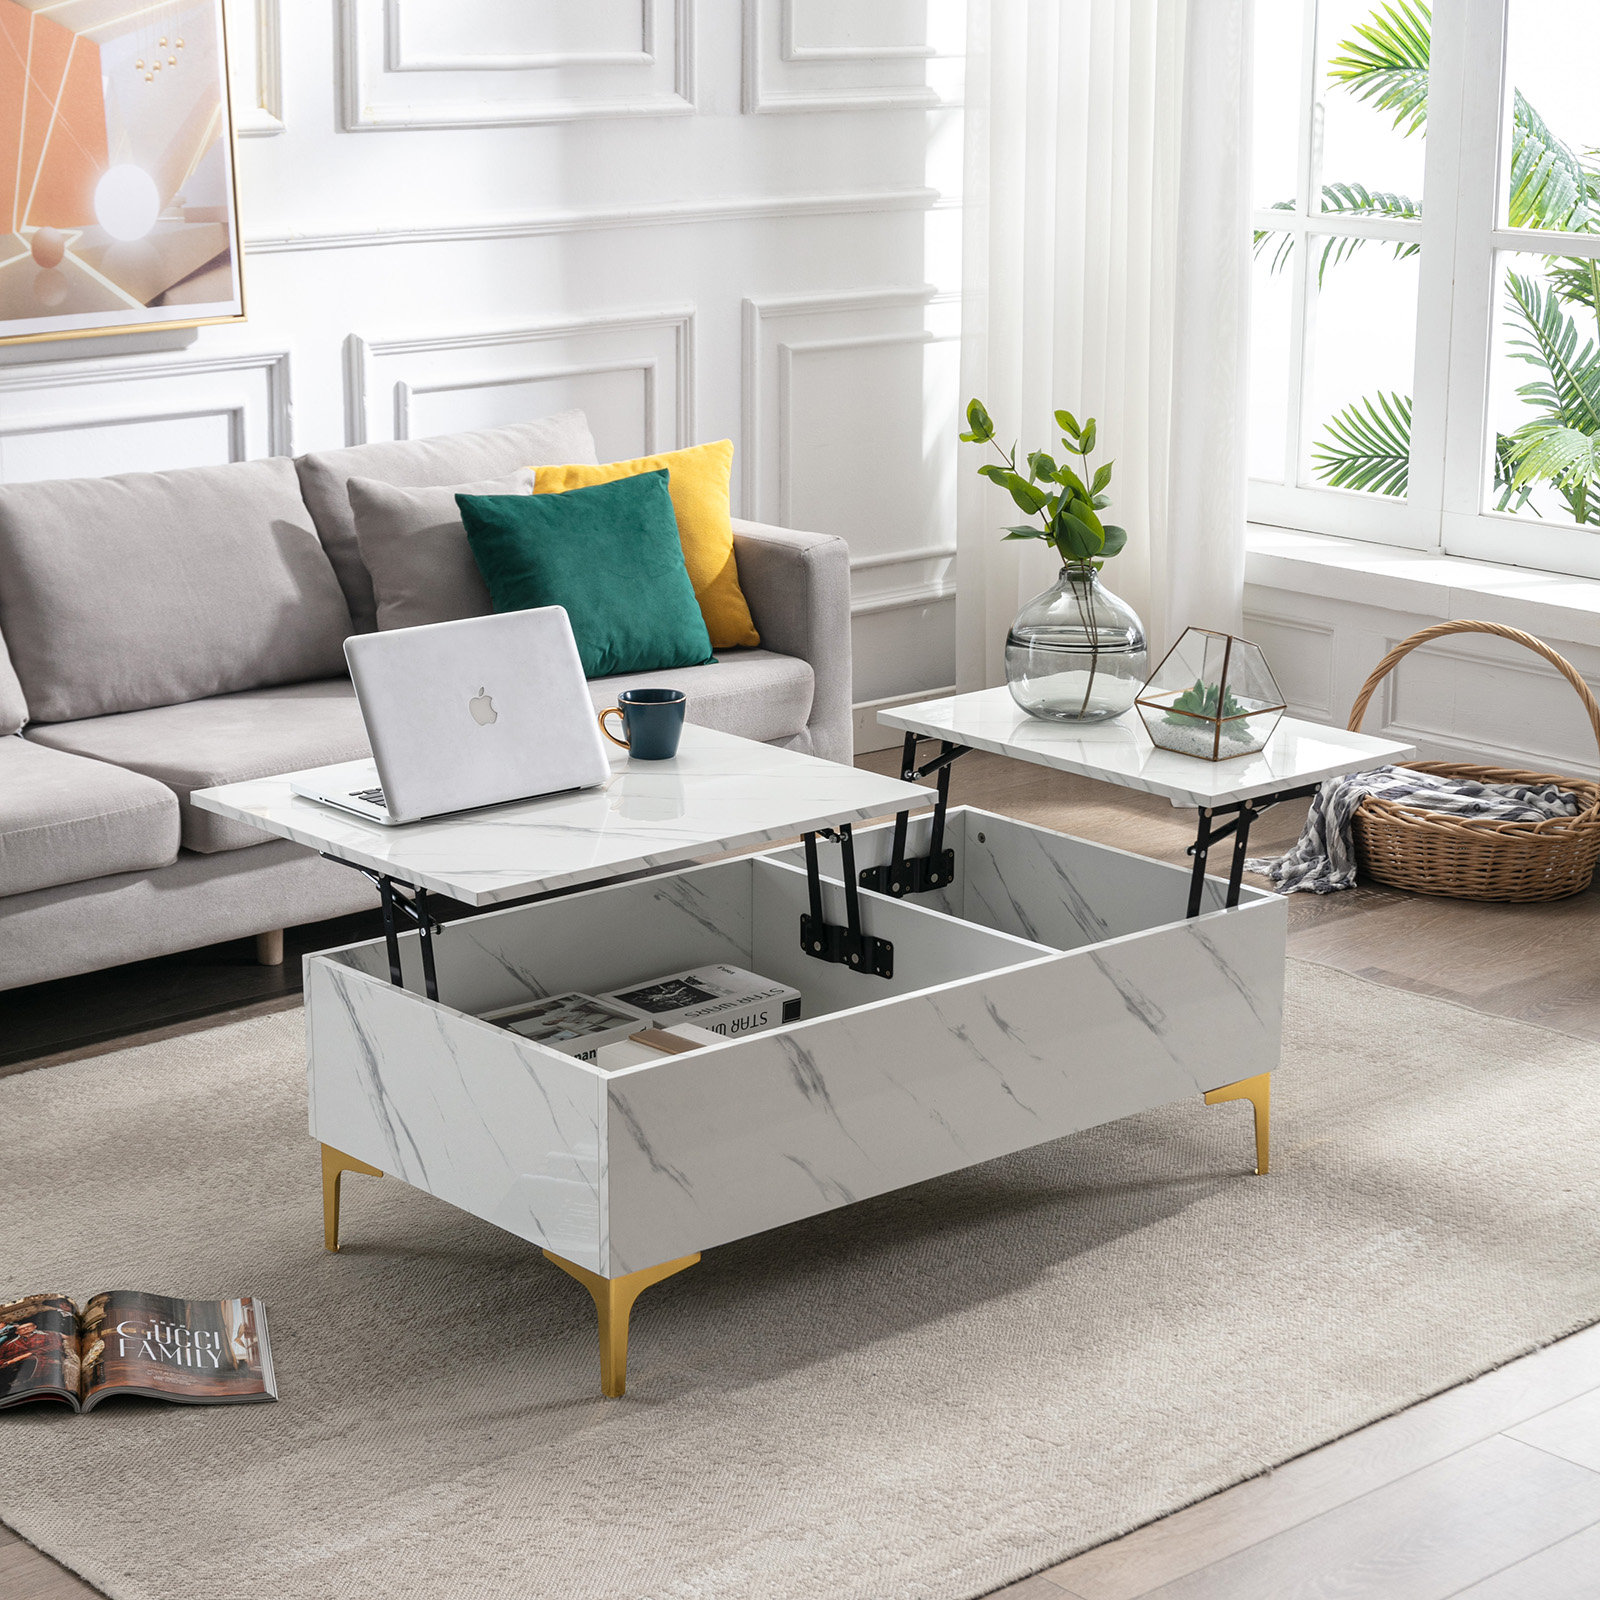 Dekeyzer Black Lift Top Extendable Coffee Table with Storage Mercer41 Table Base Color: Gold, Table Top Color: White